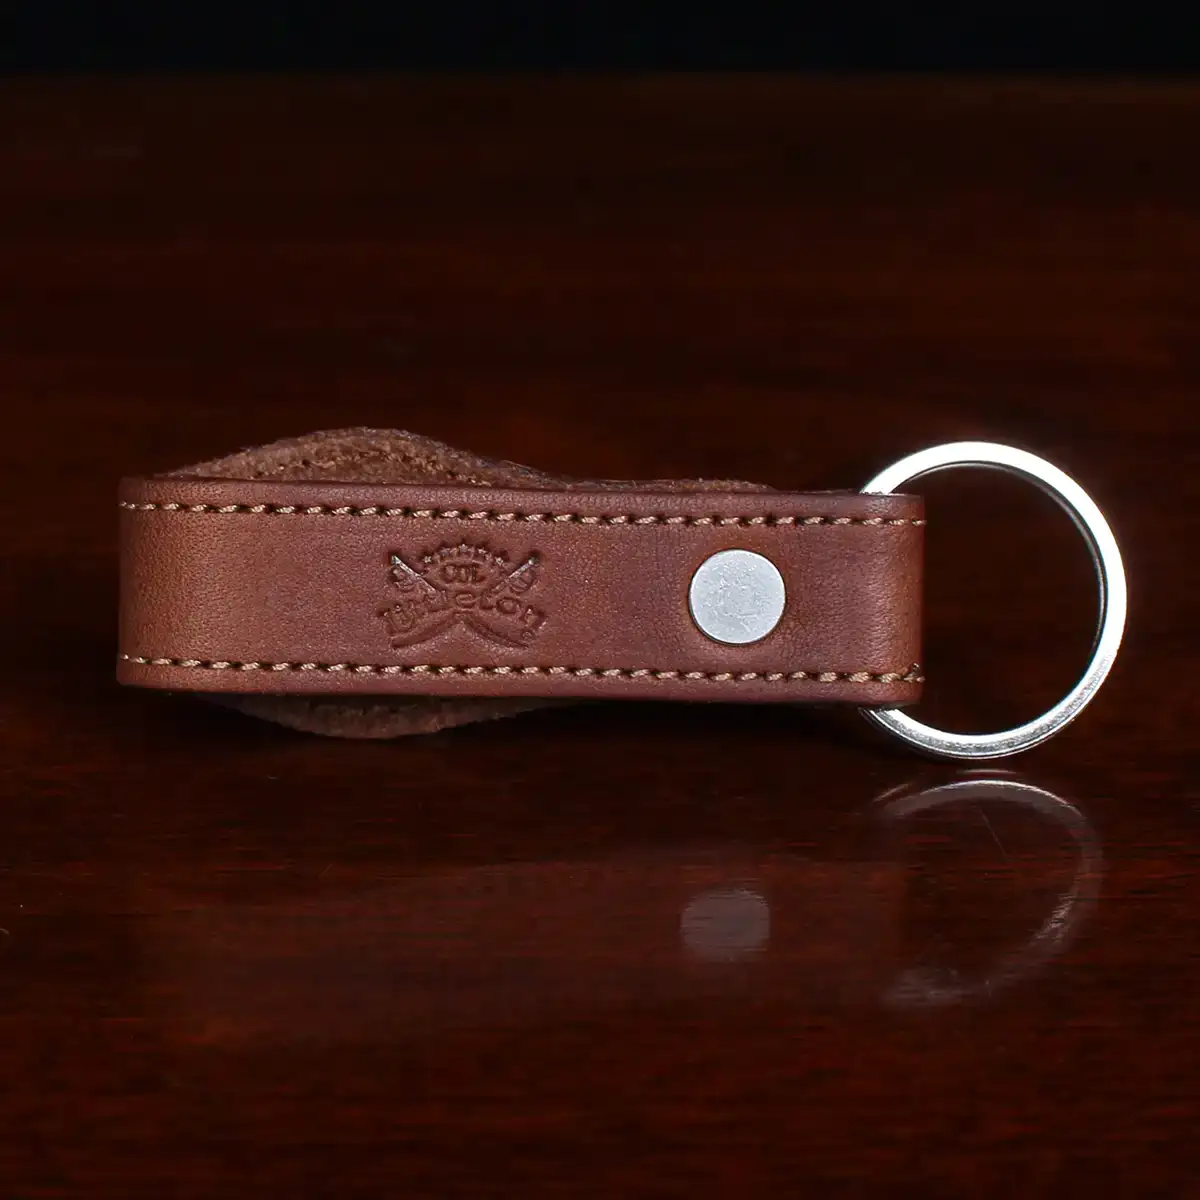 Colonel Littleton Full-Grain, Steerhide Leather No. 6 Key Ring - Brown - Nickel Finished Ball Stud Closure - Monogrammed - Handmade in USA by Col. Littleton